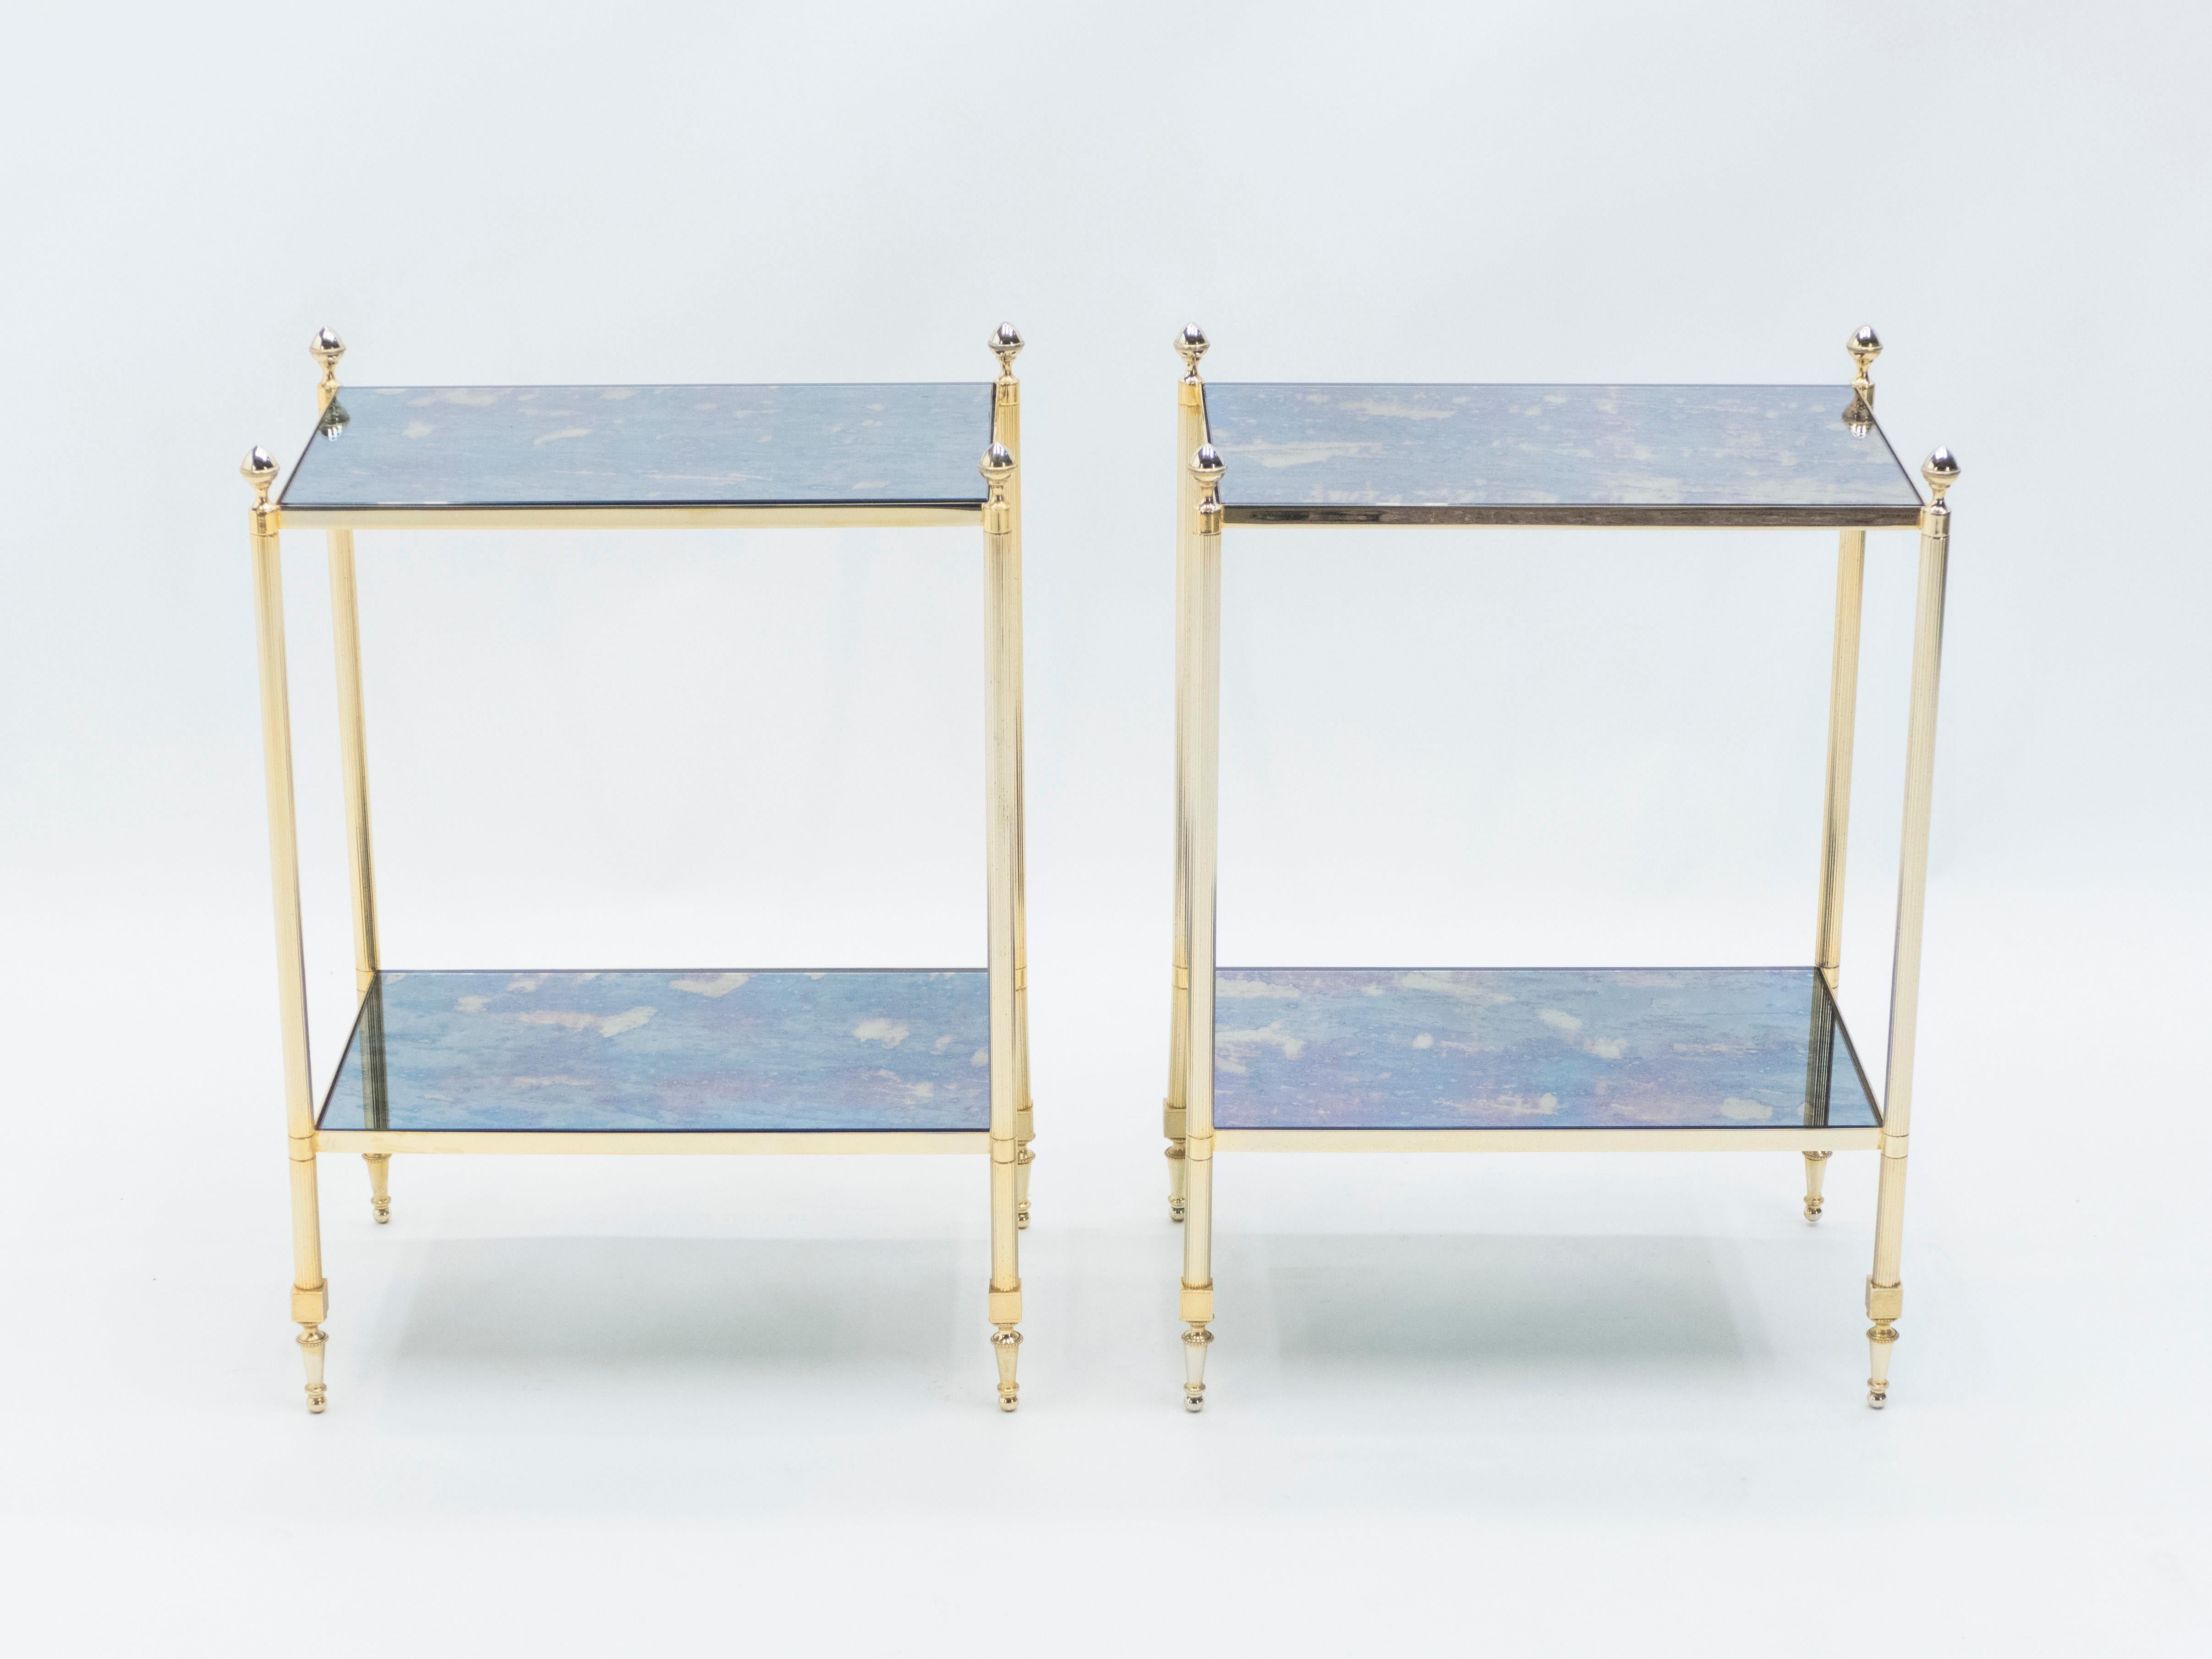 This pair of two-tier end tables by French design house Maison Jansen was created with solid brass, typical french neoclassical pine cone, and beautiful old patina mirror circa 1960. The two-tier mirrors are timeless and smooth, while the brass feet